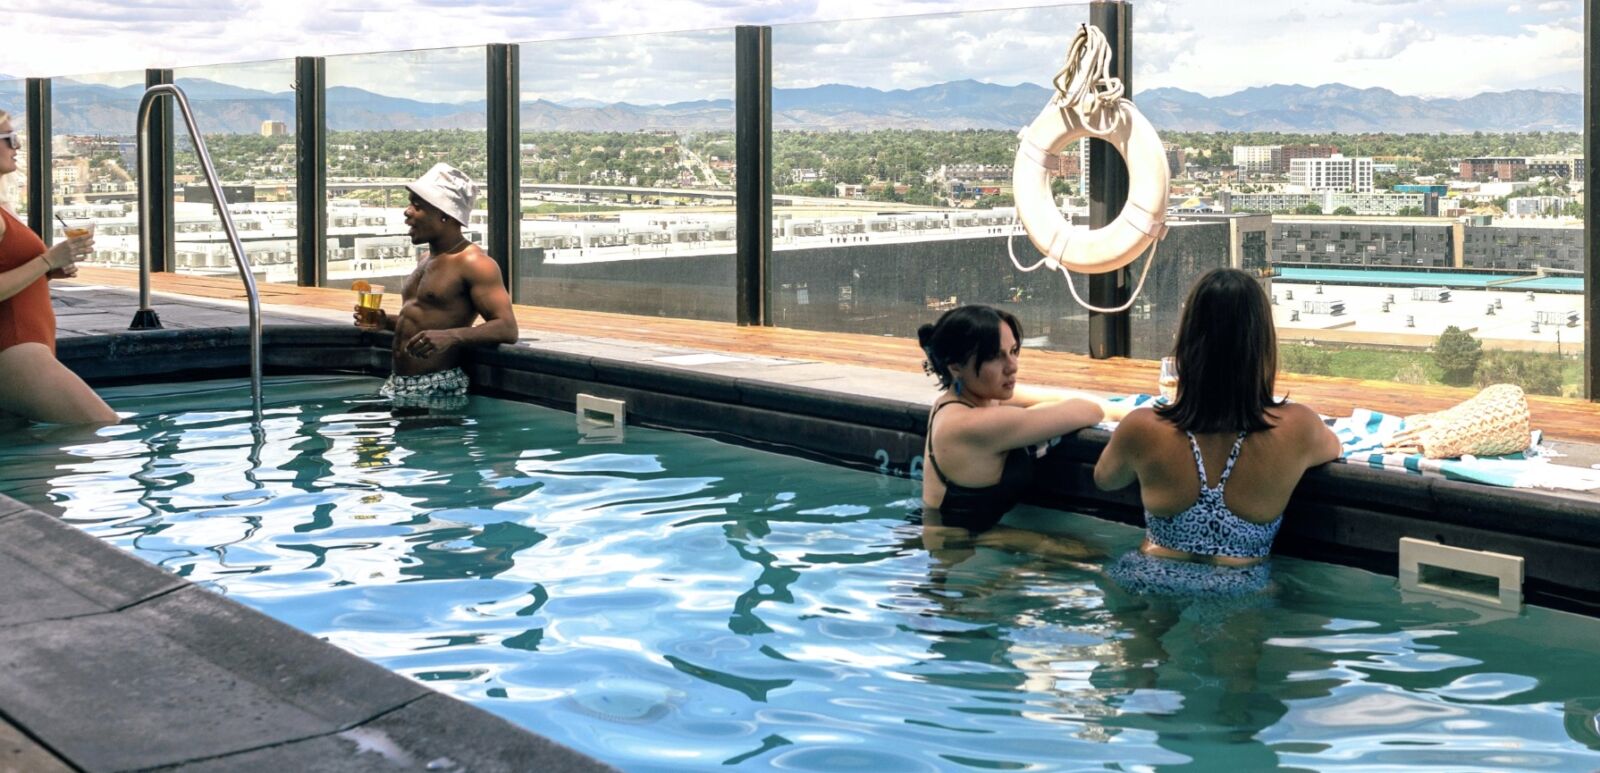 Rooftop pool at The Source in Denver.